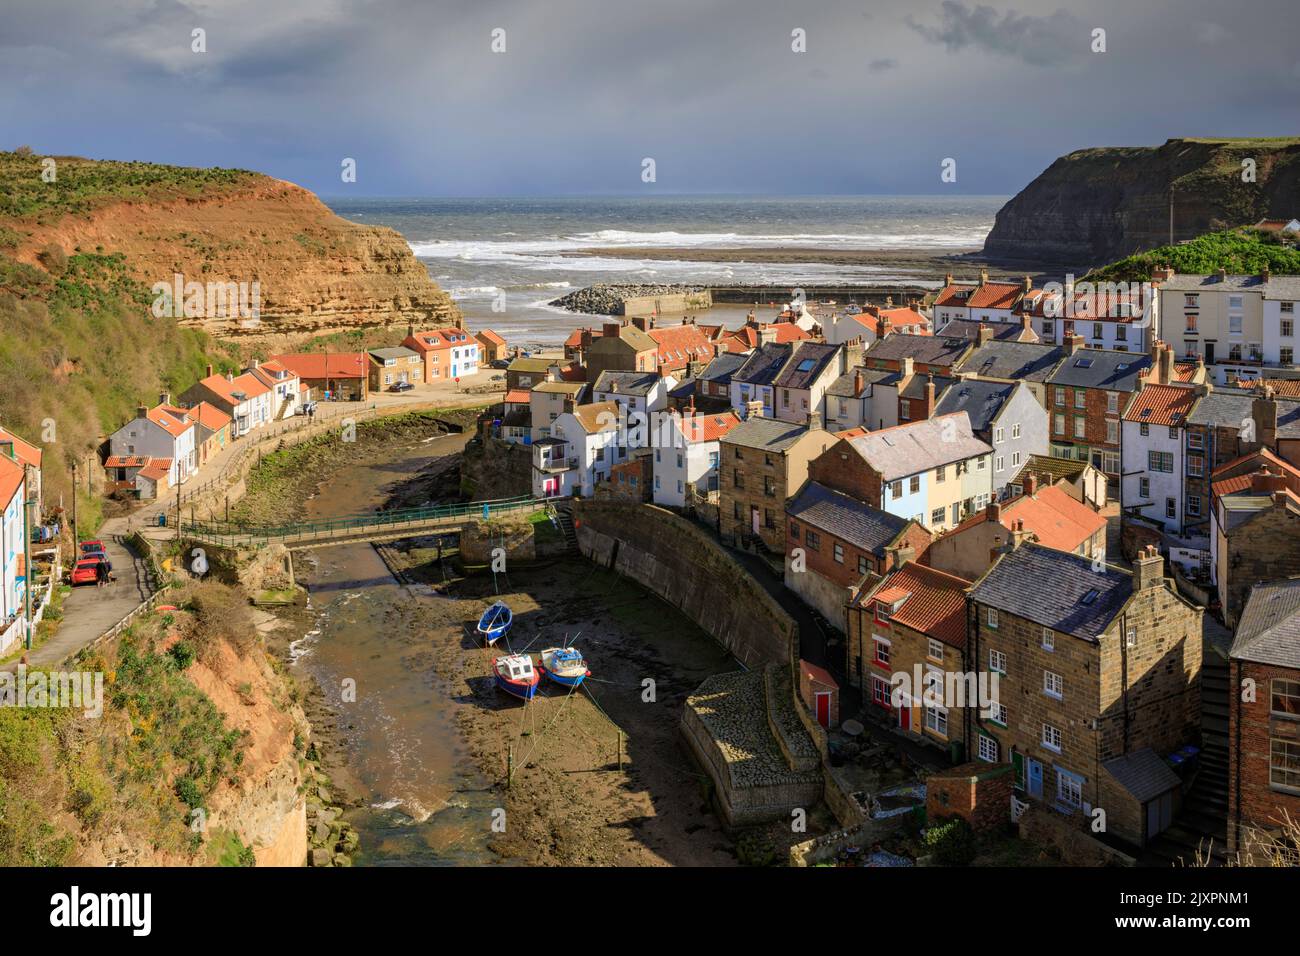 The picturesque village of Staithes on the North Yorkshire Coast captured on a stormy afternoon. Stock Photo